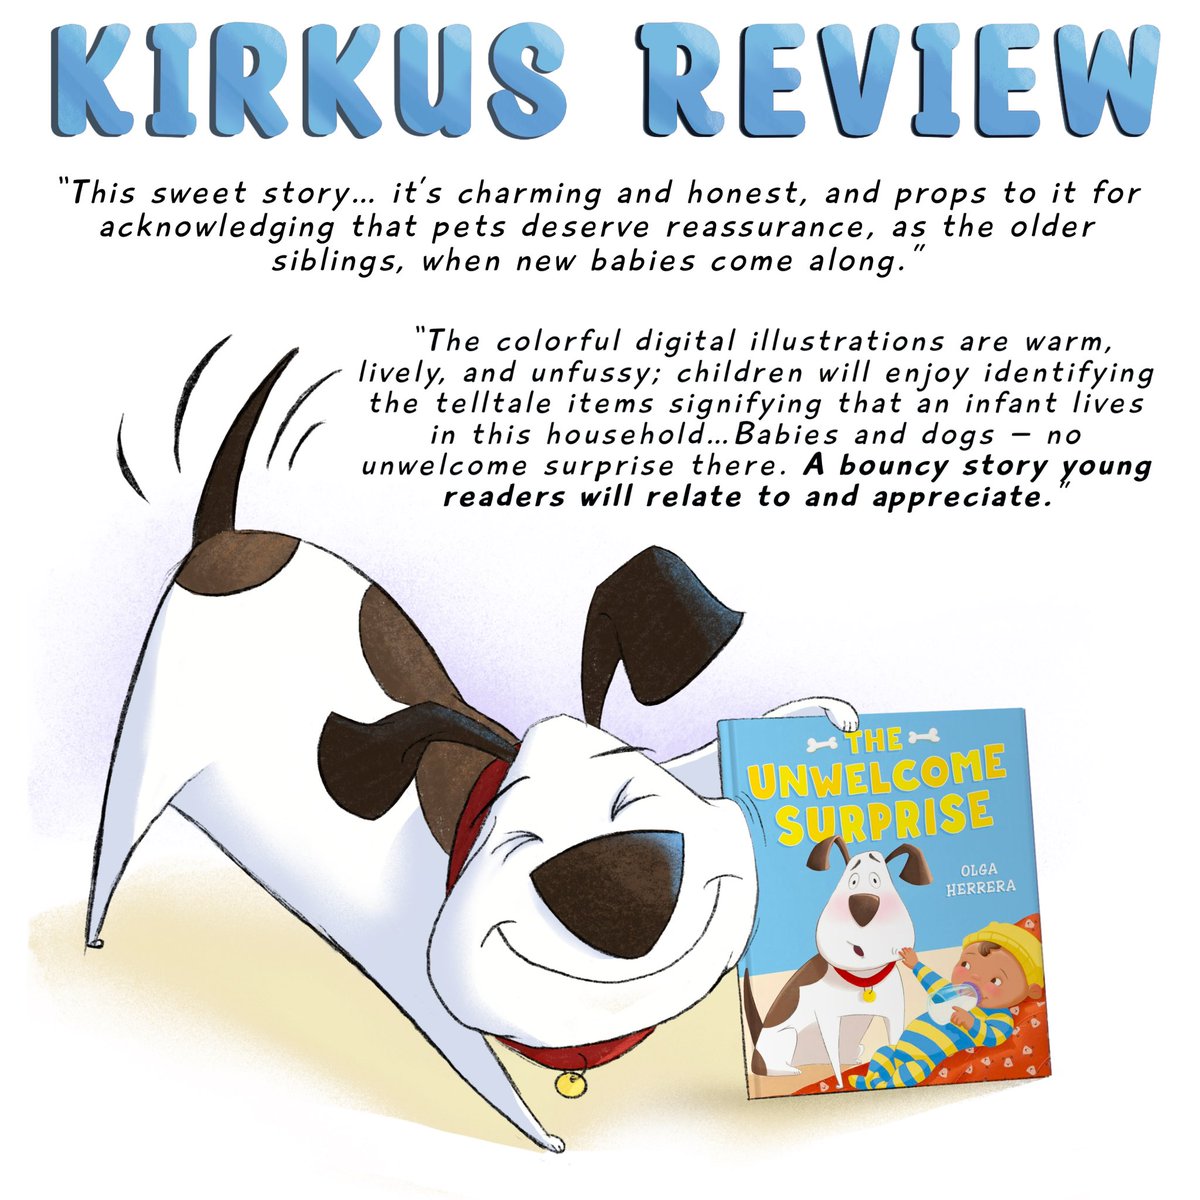 @KirkusReviews Thank you for the love and thank you to everyone who worked on this beautiful book @MacKidsBooks @Foyinsi_Pub @erinssiu @Natalie_Lakosil and the @FeiwelFriends team!  You all Rock!#bookreviews #kidlit #BookRecommendations #PictureBooks #newbaby #babybook #books